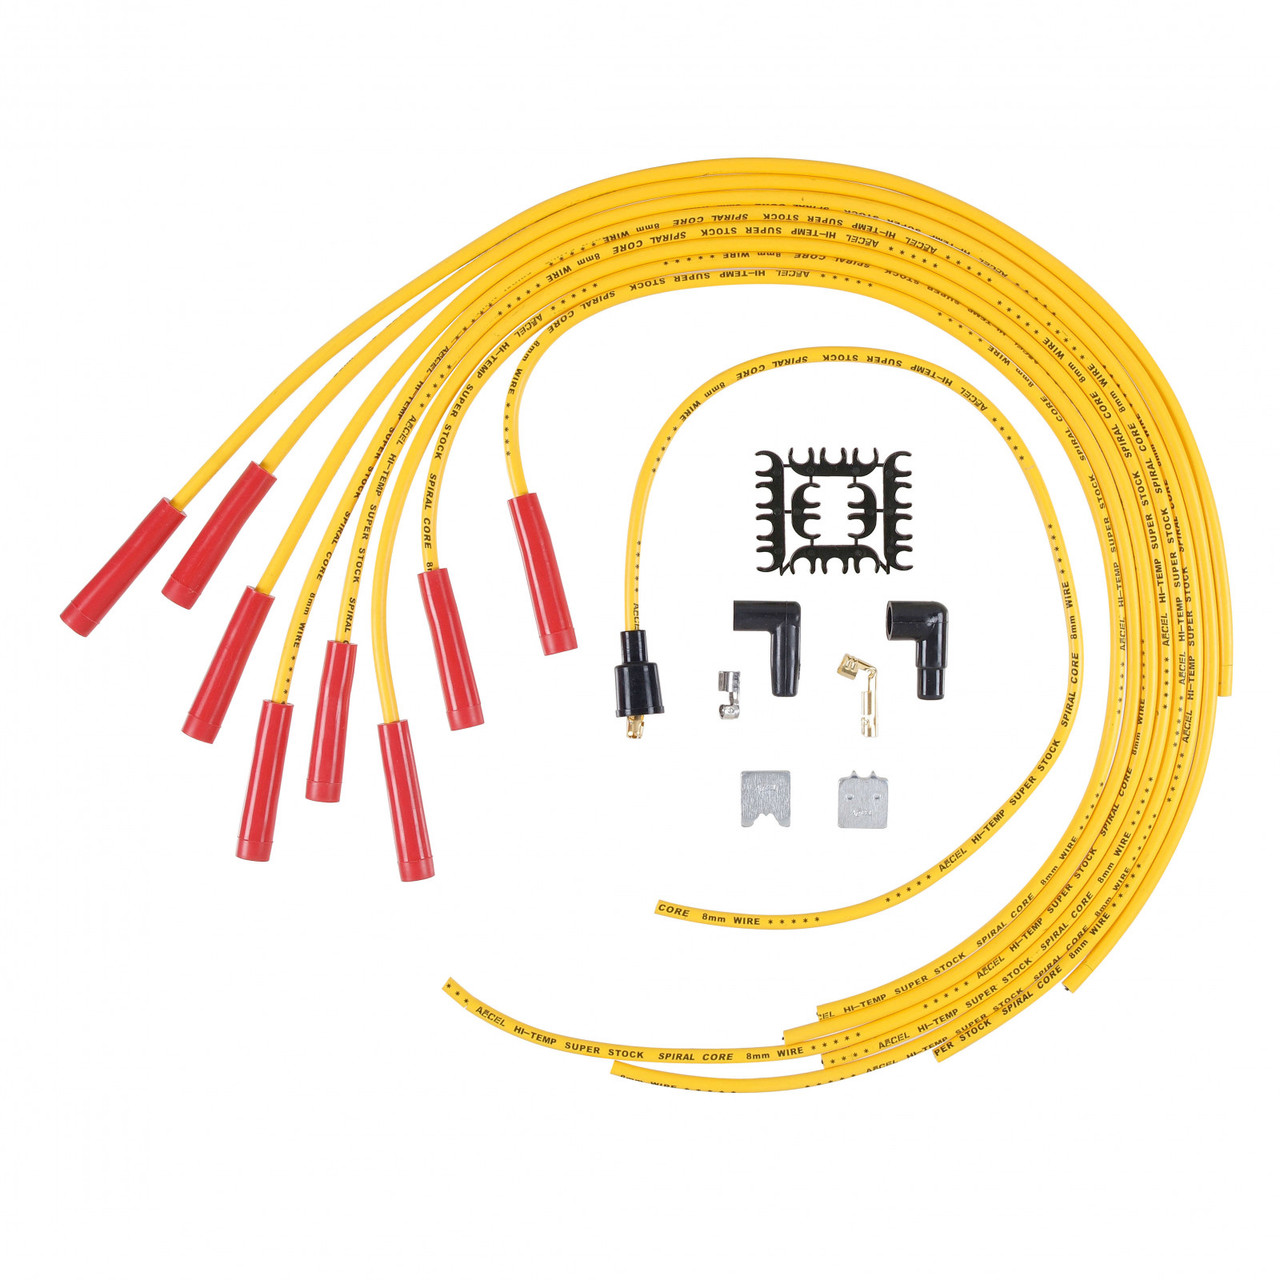 ACCEL SPARK PLUG WIRE SET - 8MM - UNIVERSAL - YELLOW WIRE WITH RED STRAIGHT BOOTS (ACC-15040Y)